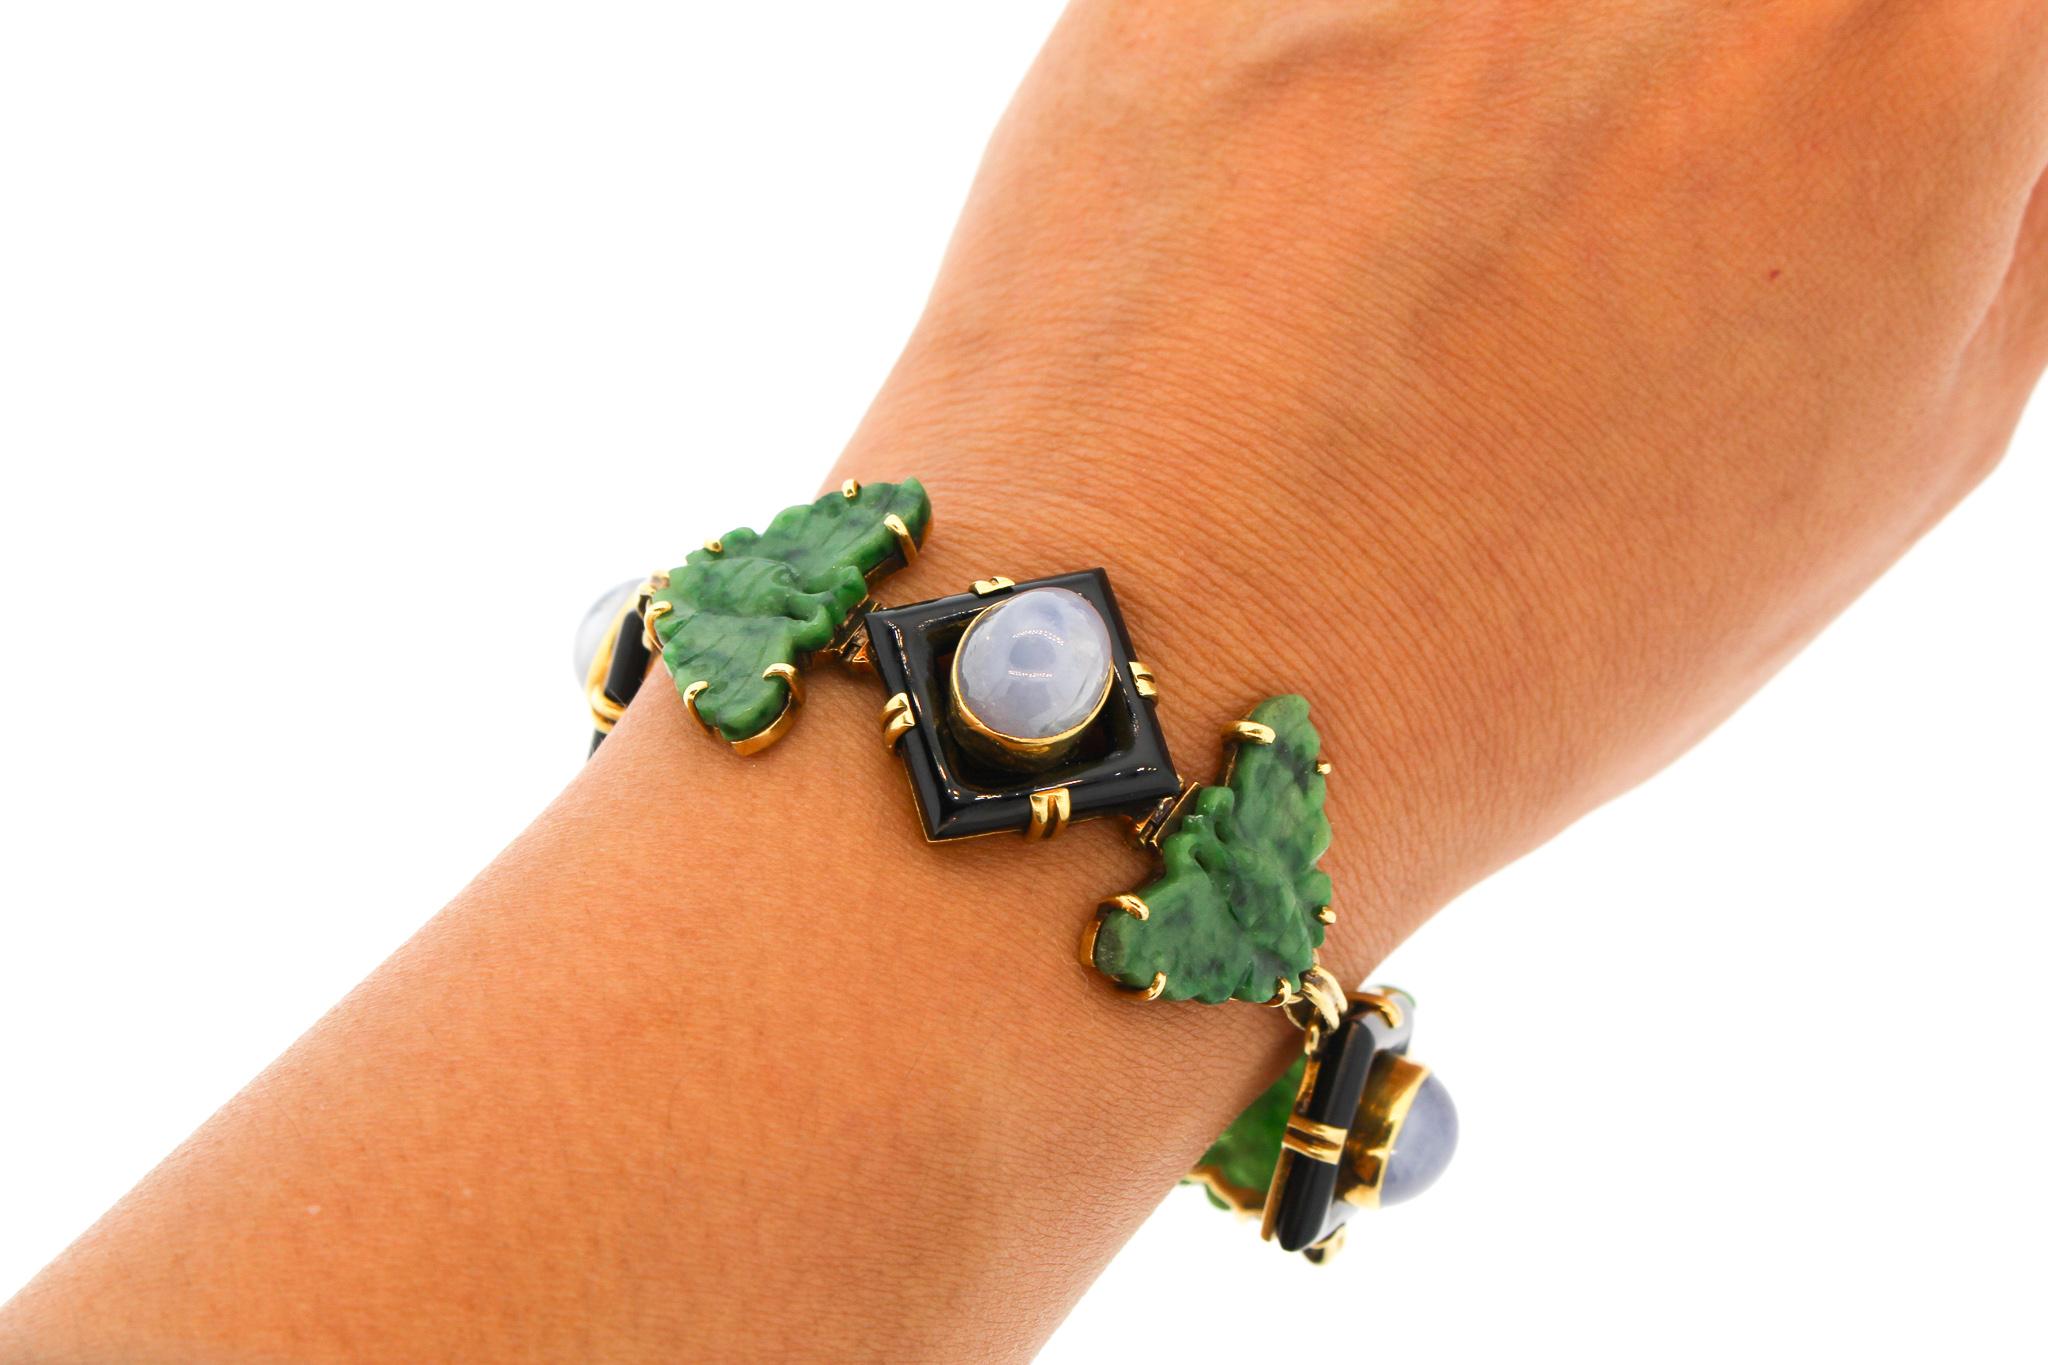 An unusual mid-century green jade butterfly bracelet made in 18k with links of carved onyx set with cabochon light blue sapphires. The bracelet was made in the 1960s and has the mark WL for Walter Lampl, who sold and made jewelry in New York. The